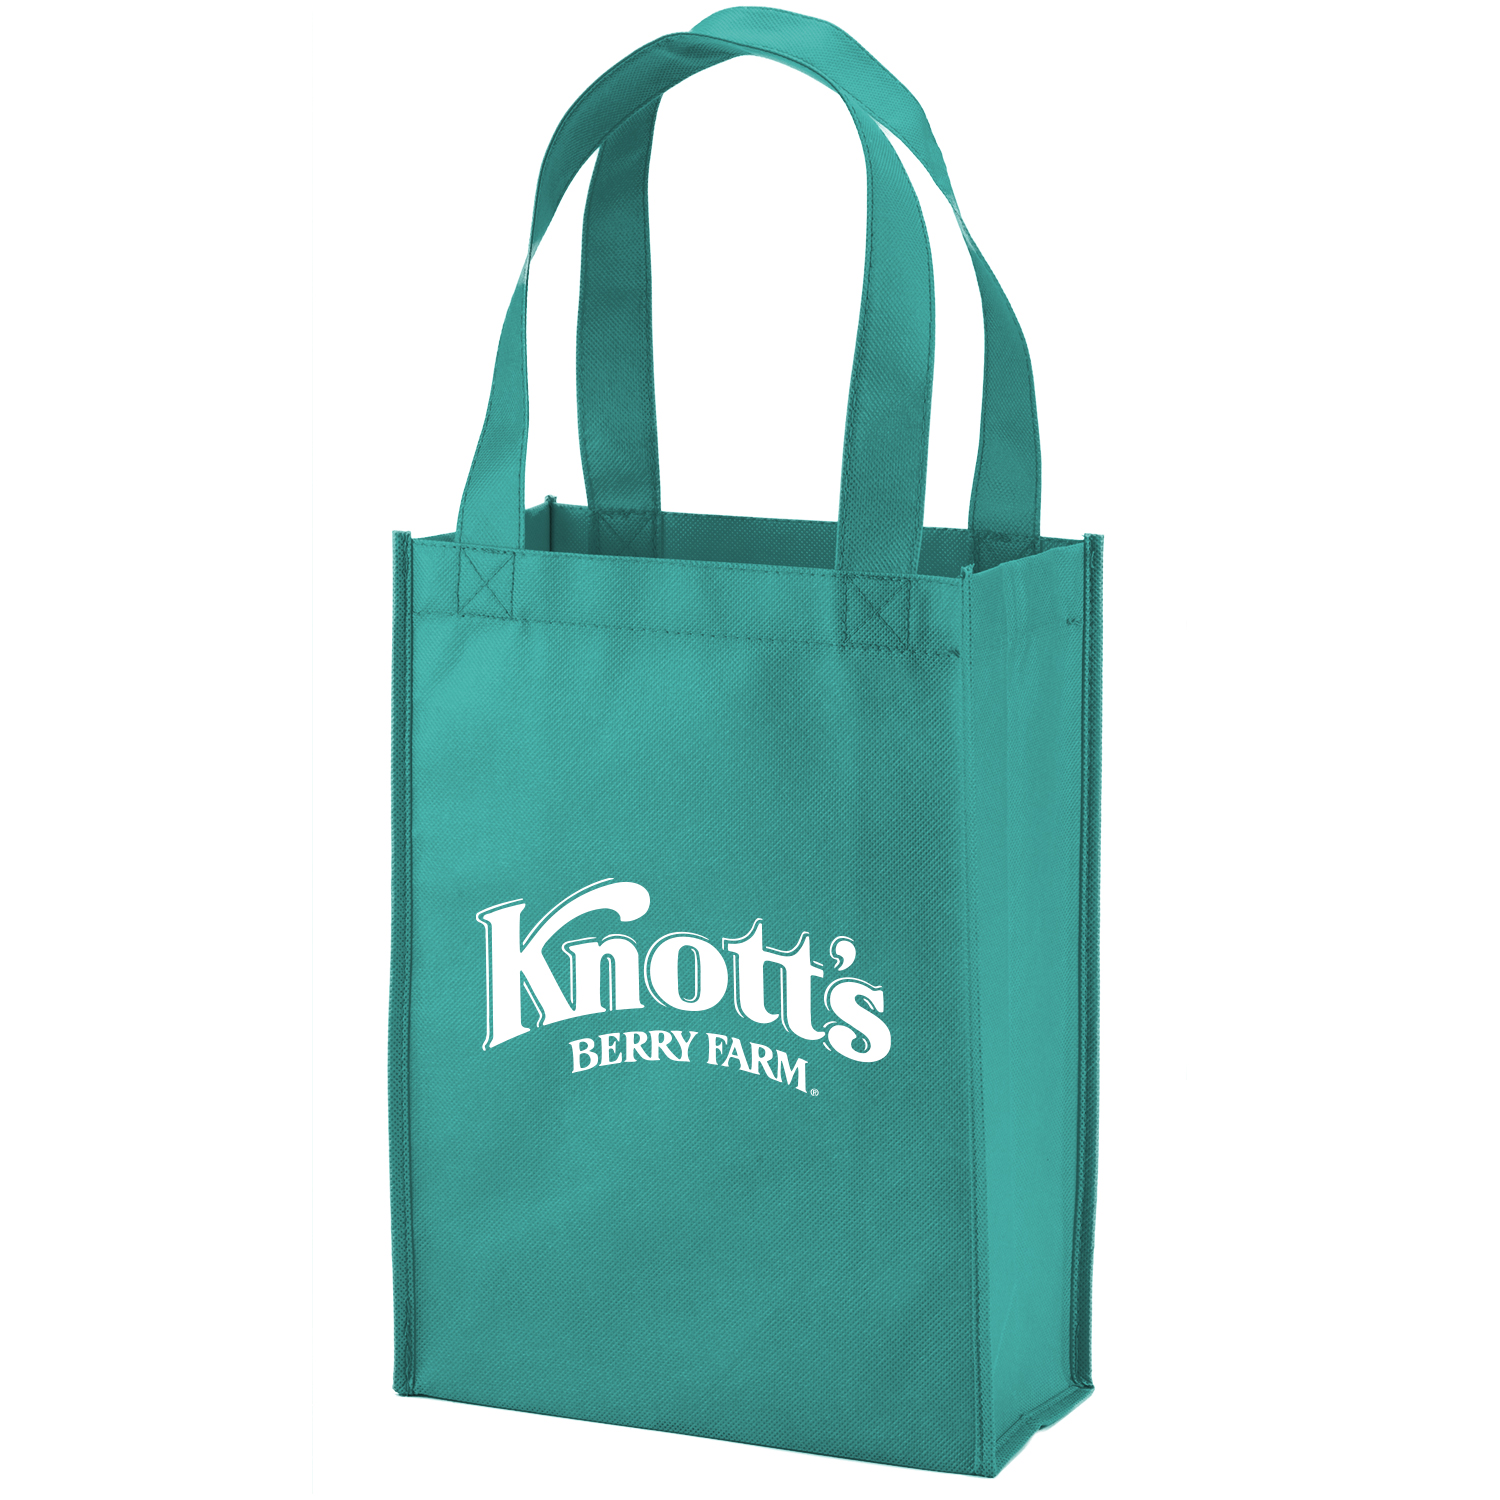 :: Evans Manufacturing - Promotional Products Supplier, Plastic ...